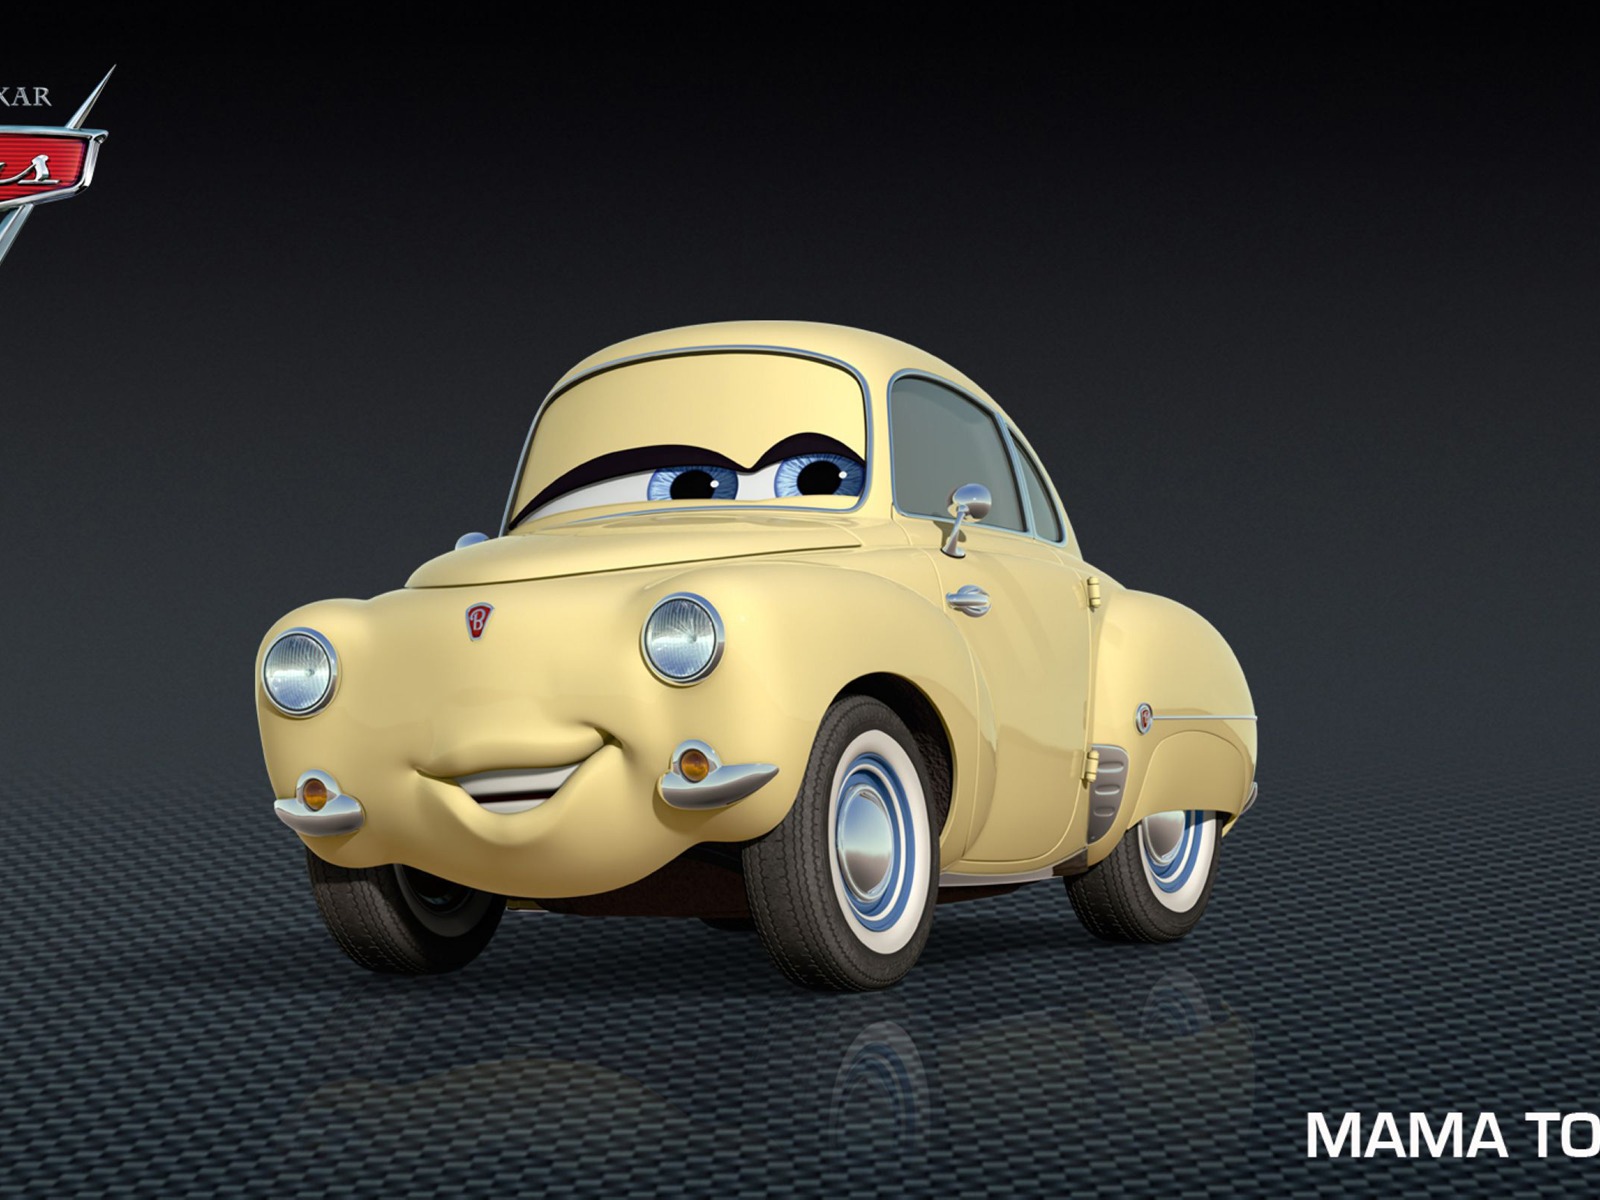 Cars 2 wallpapers #27 - 1600x1200